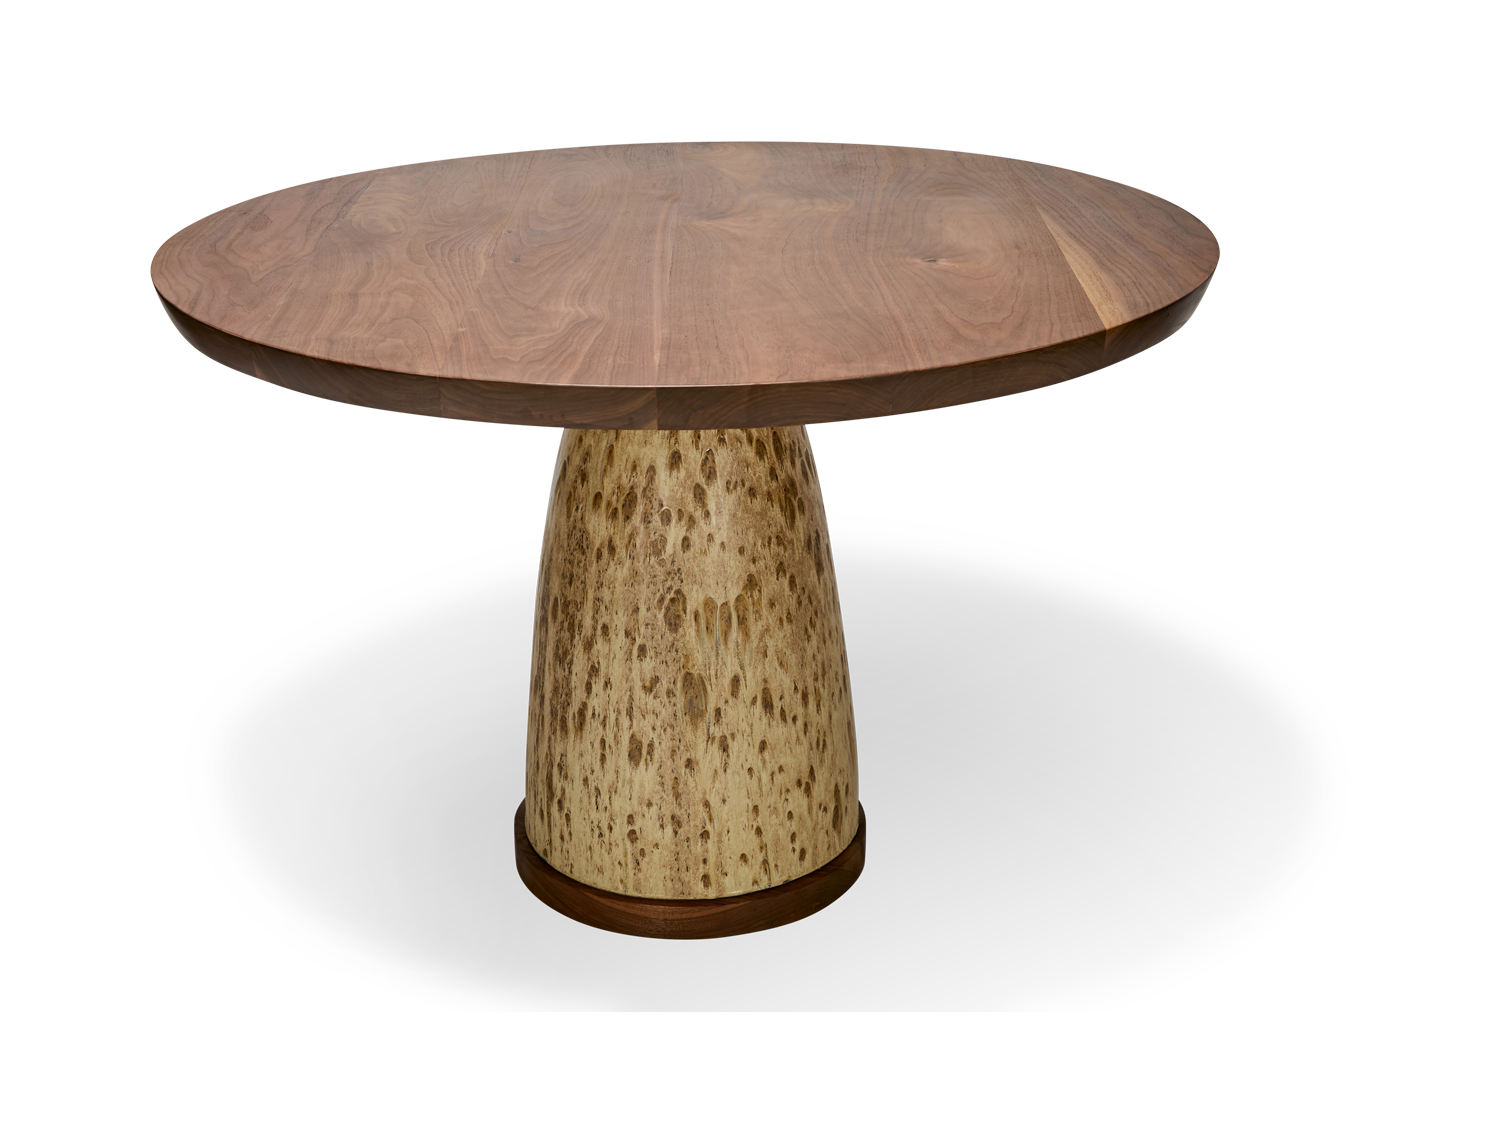 Desert Cheese Dining Room Table with Wood Top